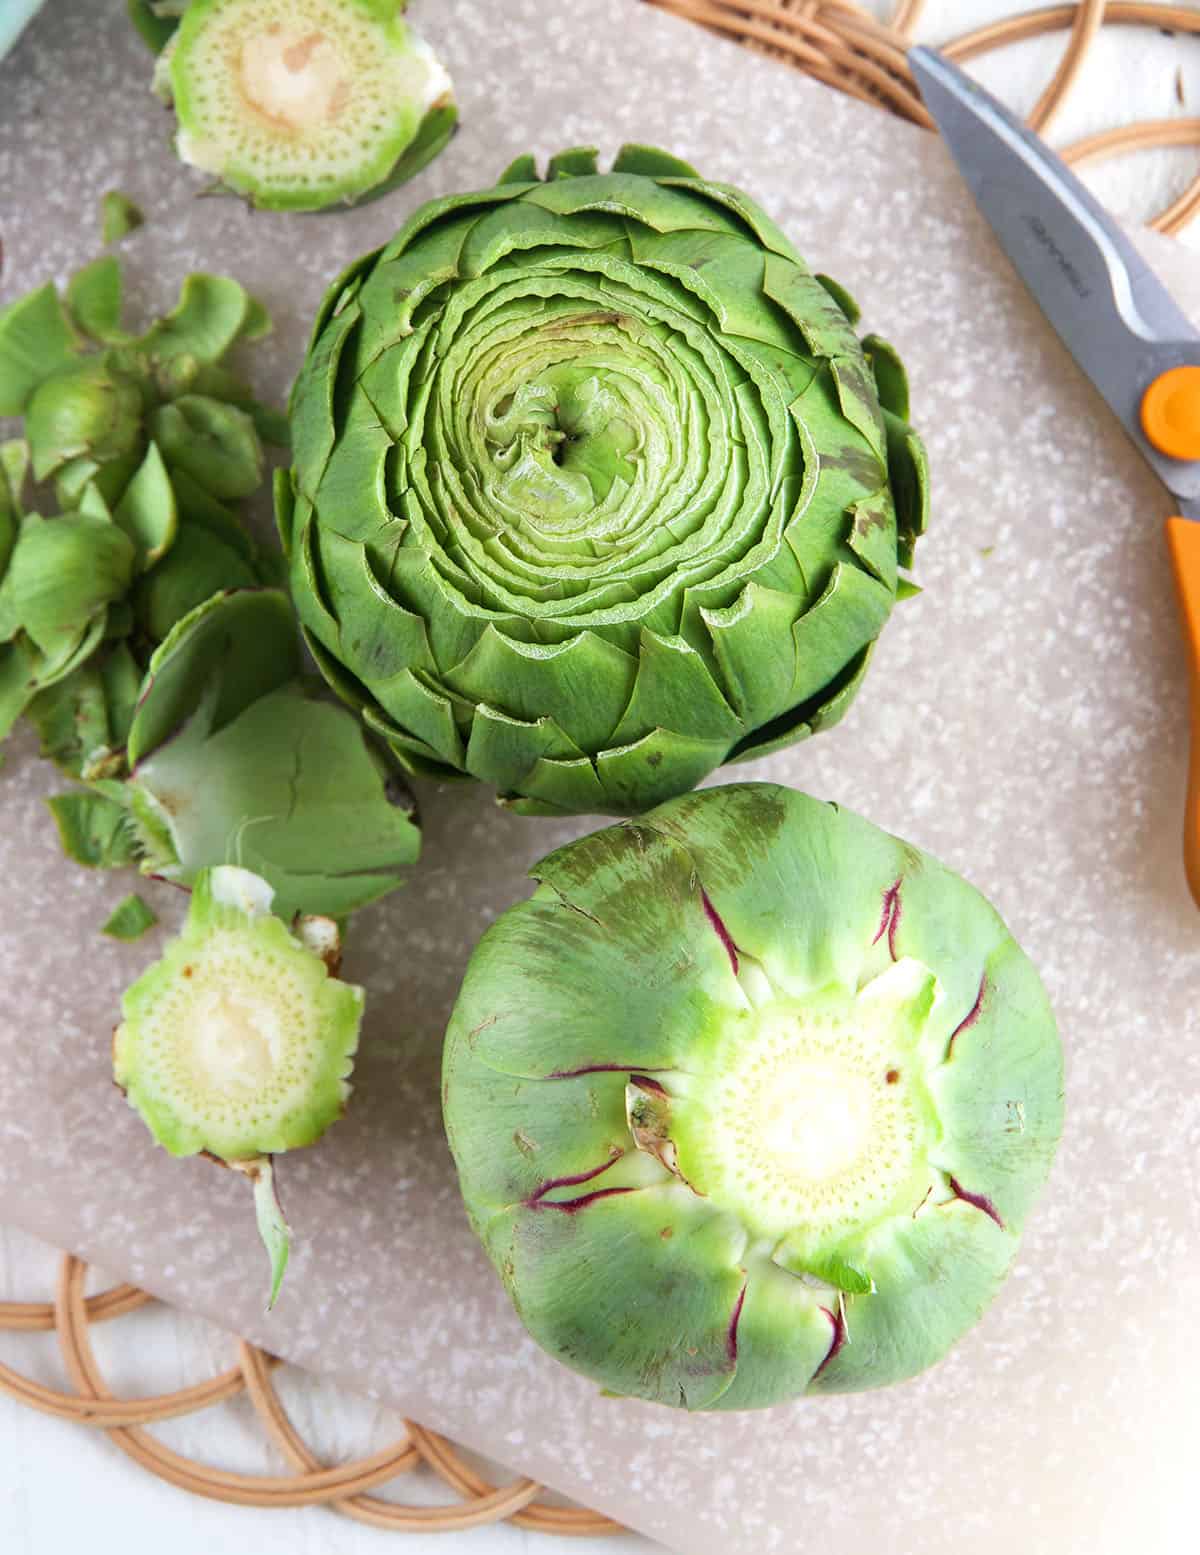 Artichokes have been sliced. 